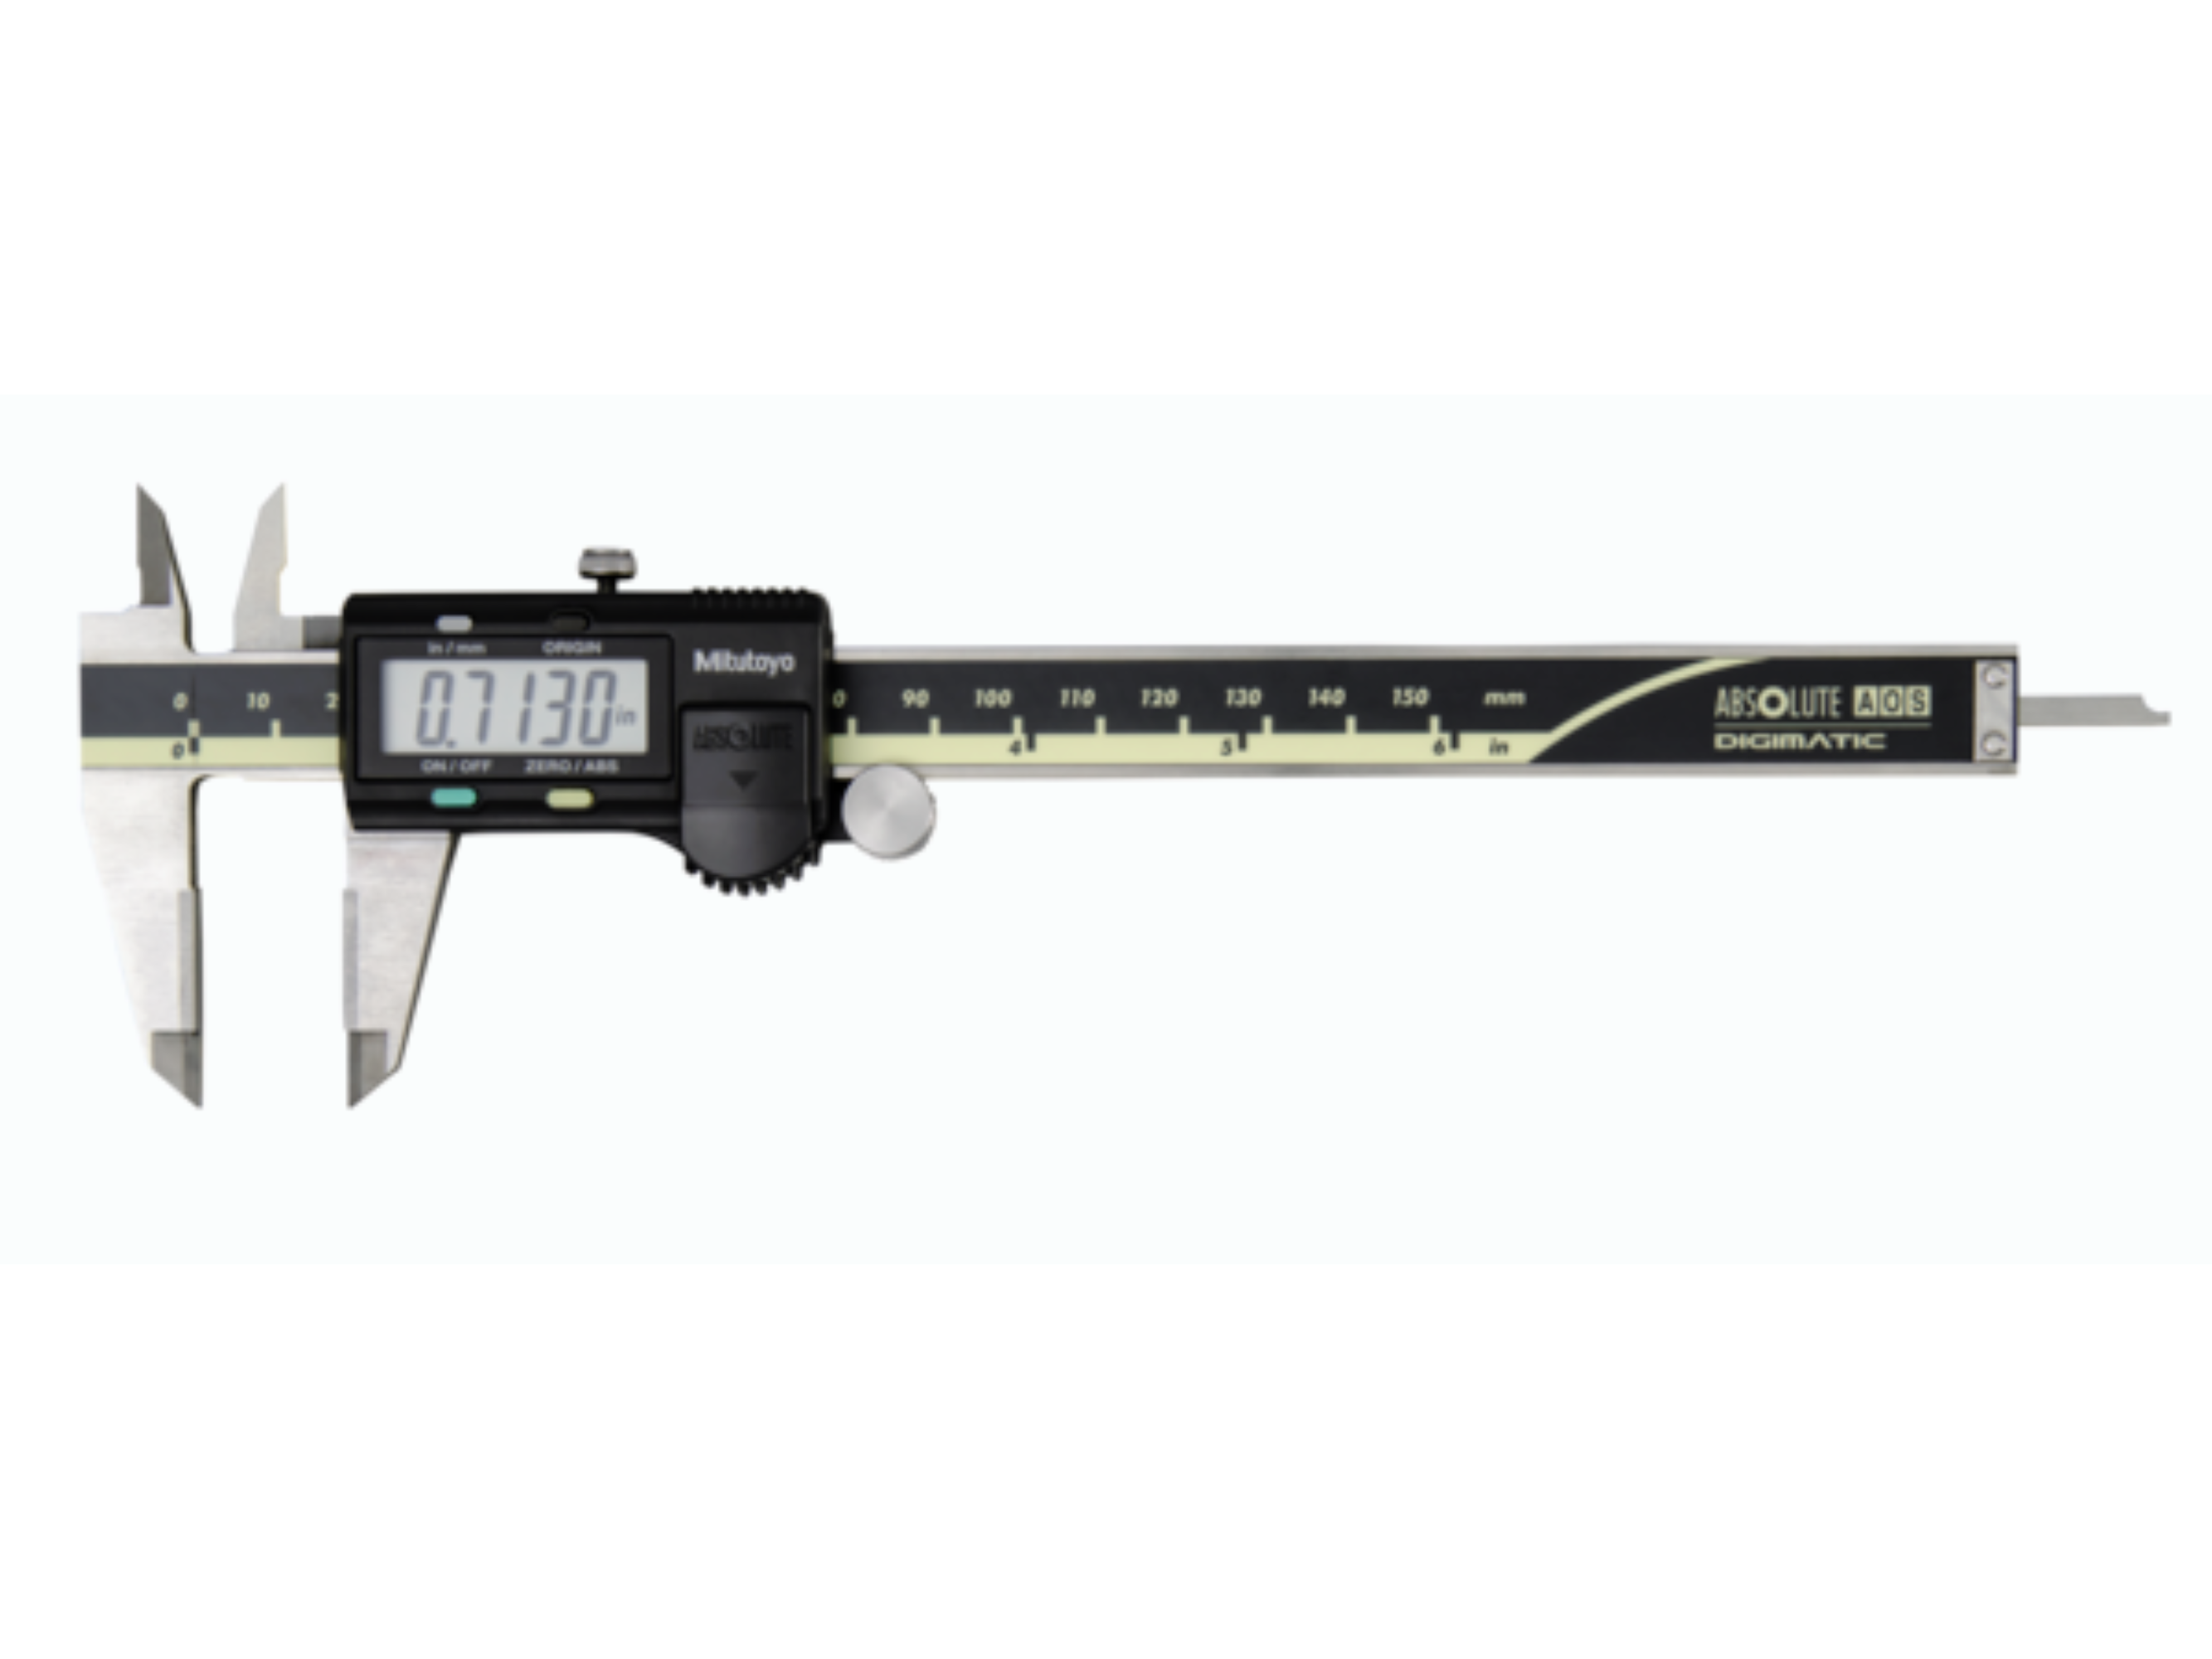 Digital ABSOLUTE AOS Calipers 0-200mm (0-8") With Output Carbide OD/ID Jaws 500-177-30